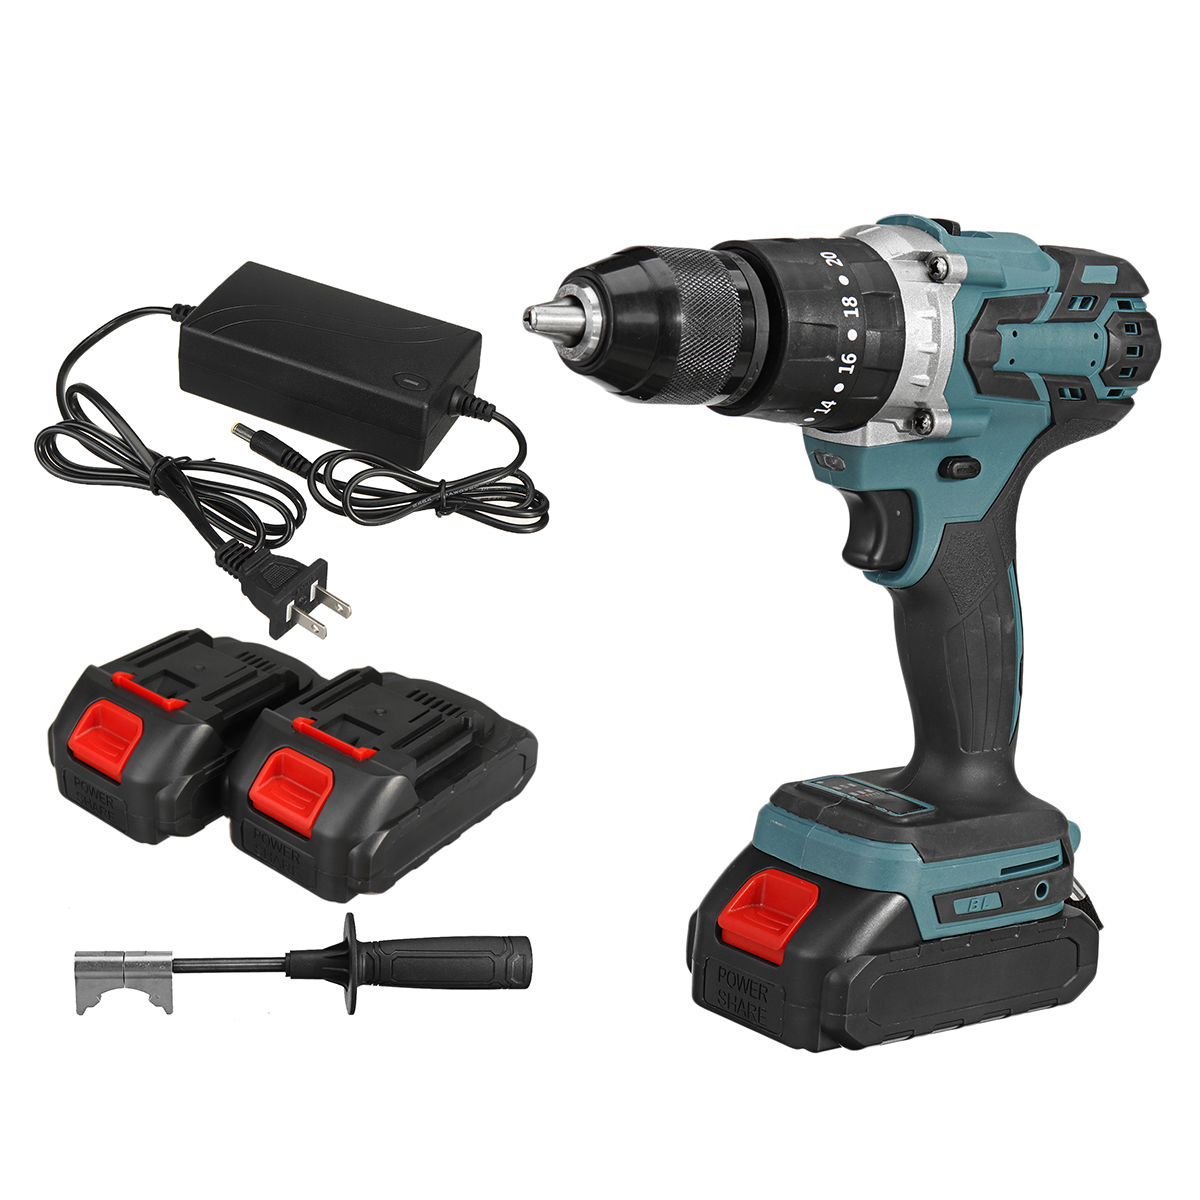 Cordless-Electric-Impact-Drill-3-in-1-Rechargeable-Drill-Screwdriver-13mm-Chuck-W-1-or-2-Li-ion-Batt-1803323-1